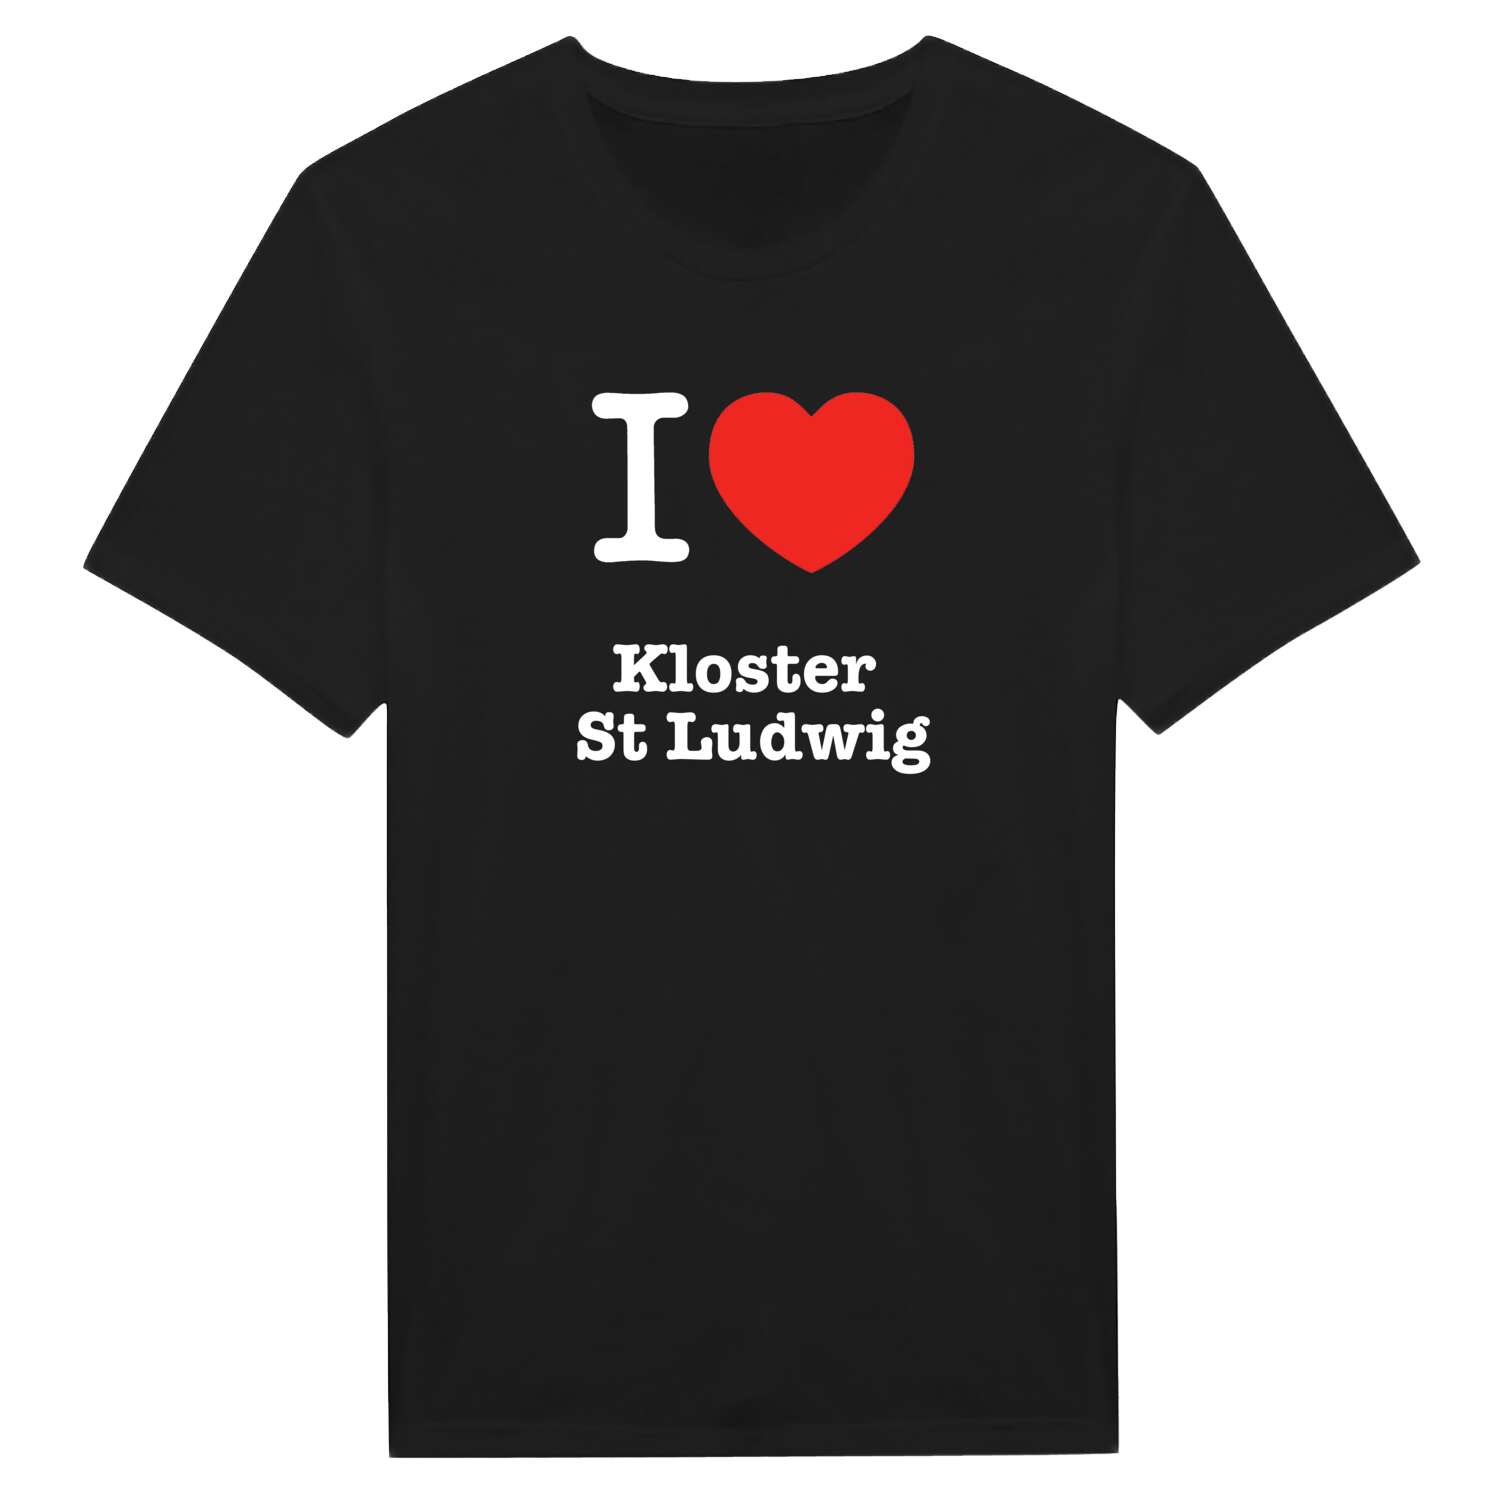 Kloster St Ludwig T-Shirt »I love«